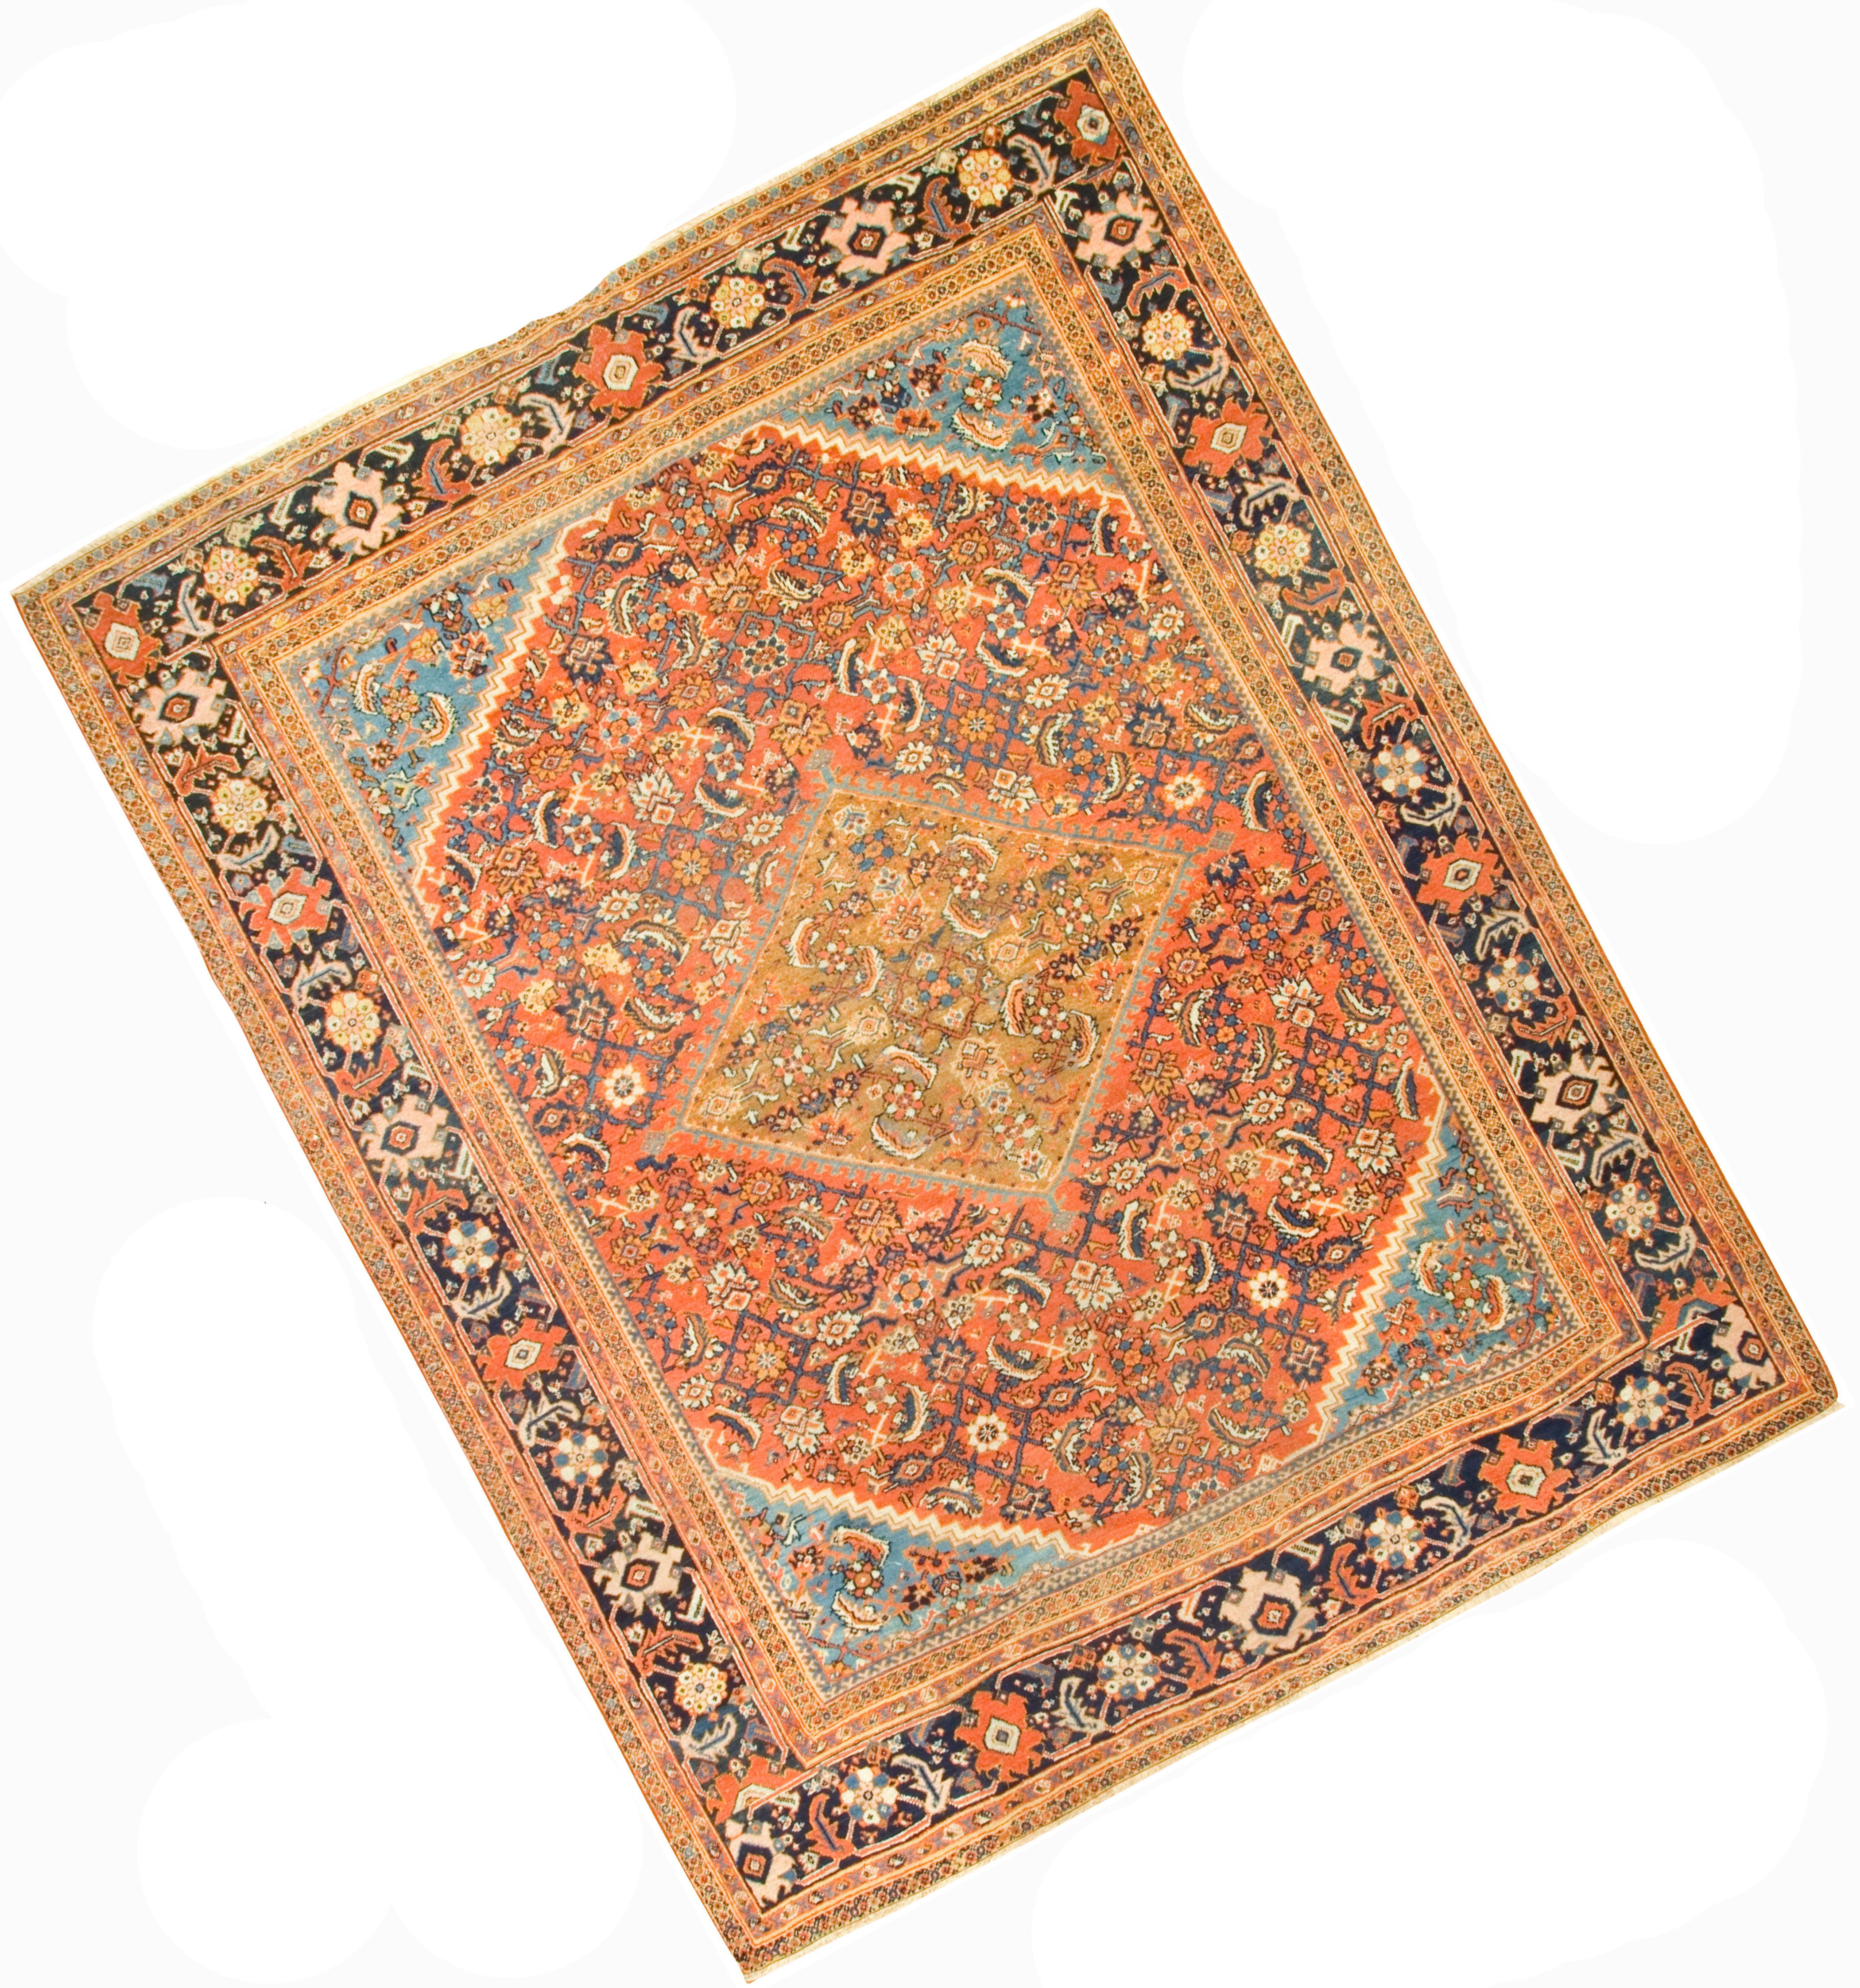 Hand-Knotted Antique Persian Sultanabad Rug Carpet, circa 1900 9' x 11' For Sale